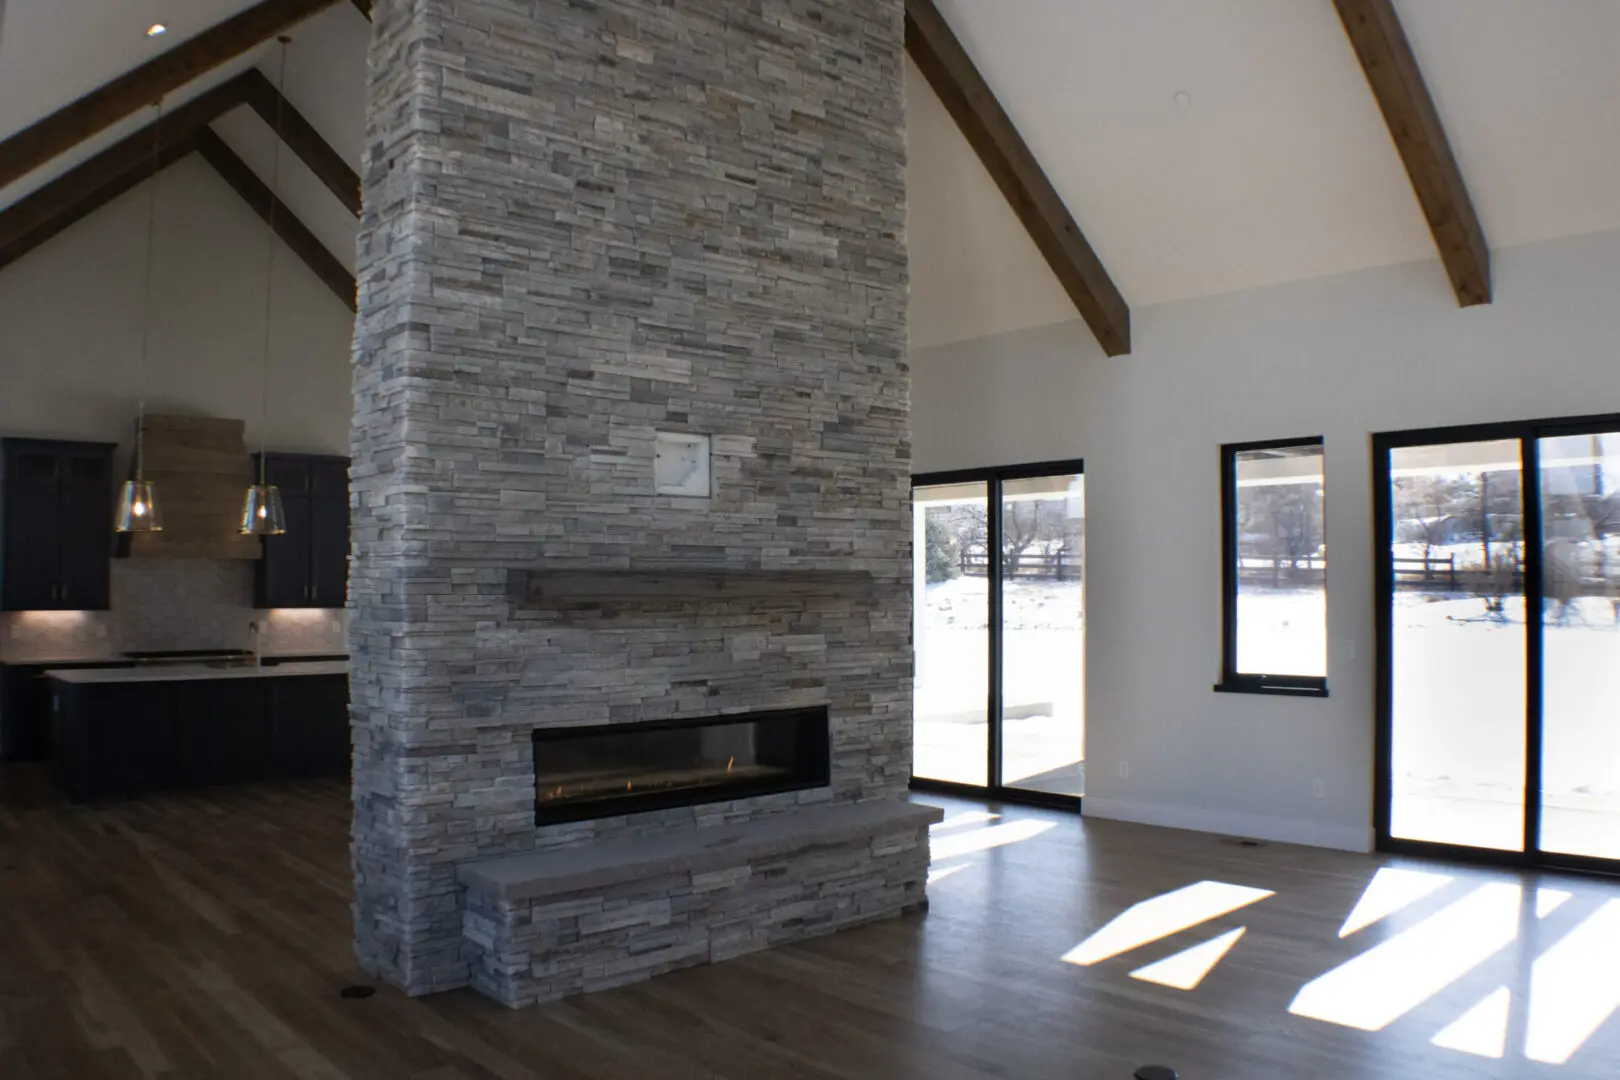 a room with a fireplace in the middle